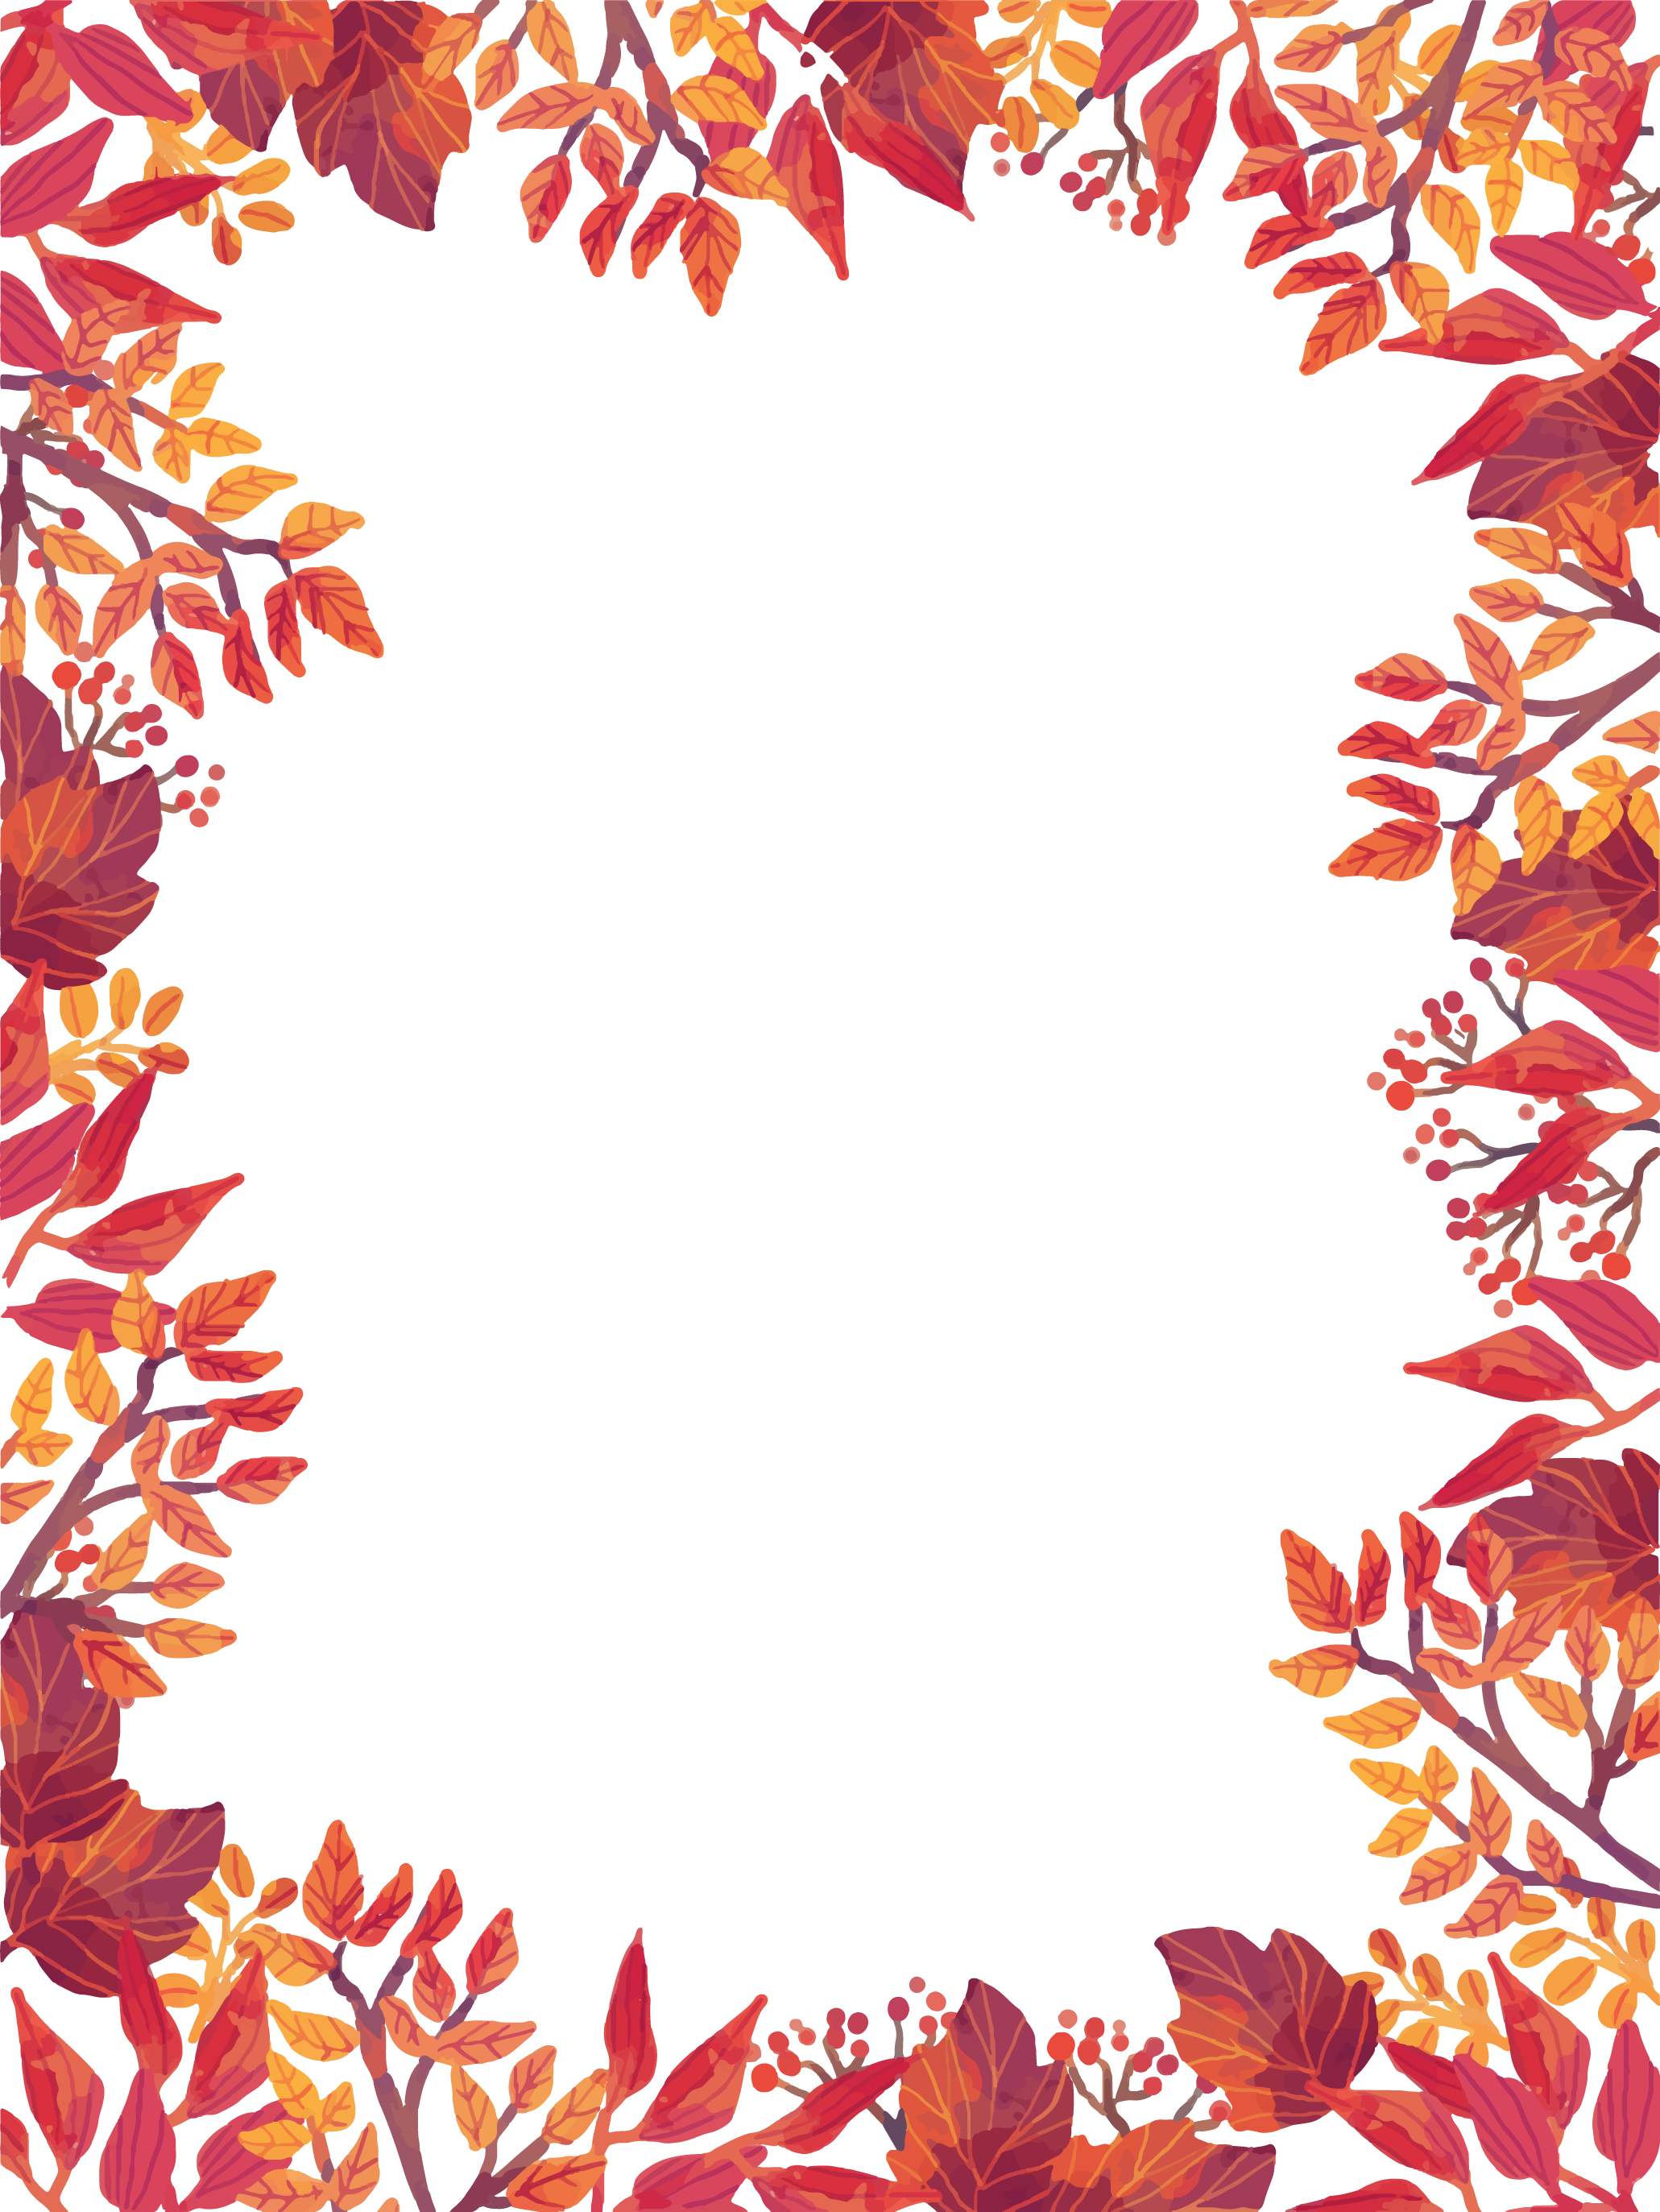 Autumn Leaves Border Png And Free Autumn Leaves Borderpng Transparent